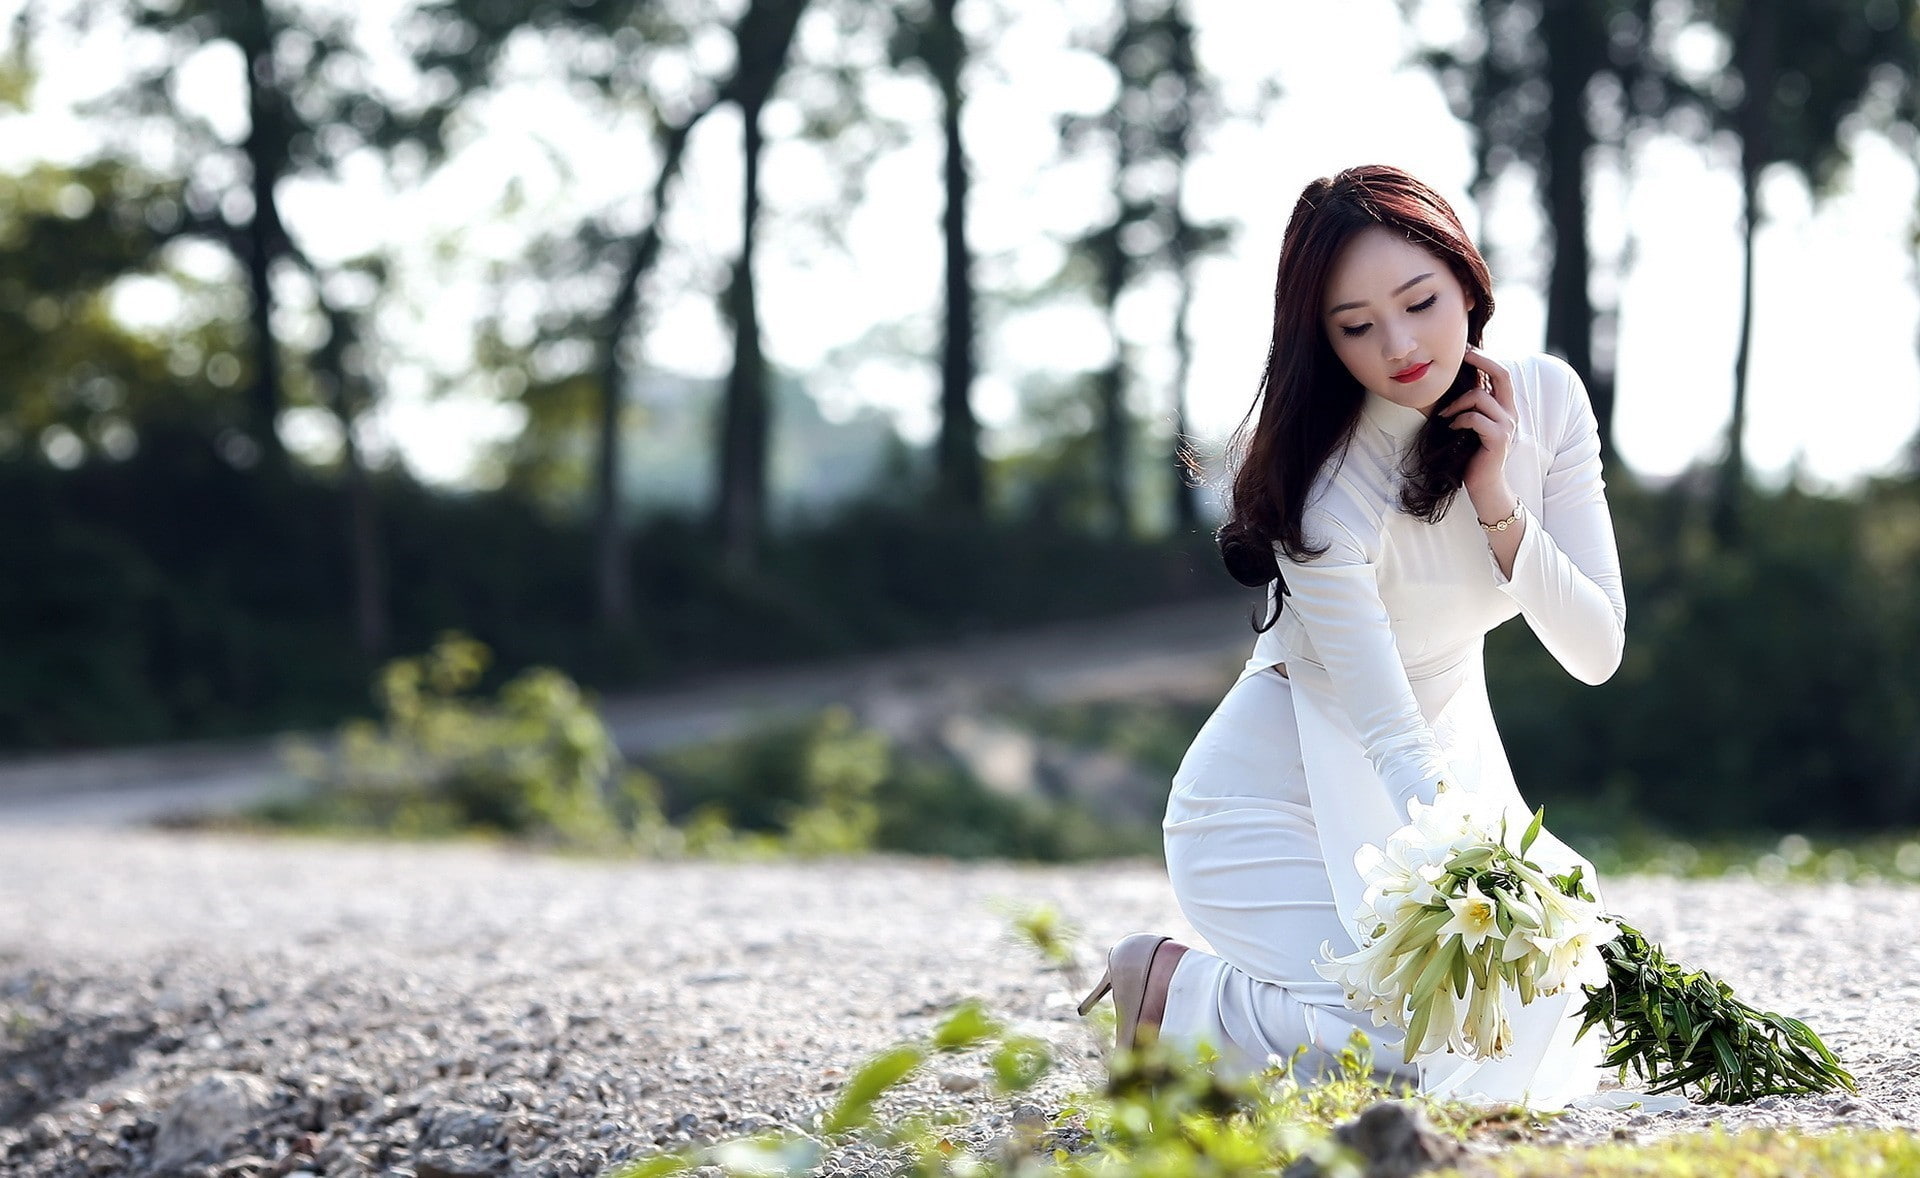 Asian, women outdoors, model, plant, young adult, one person